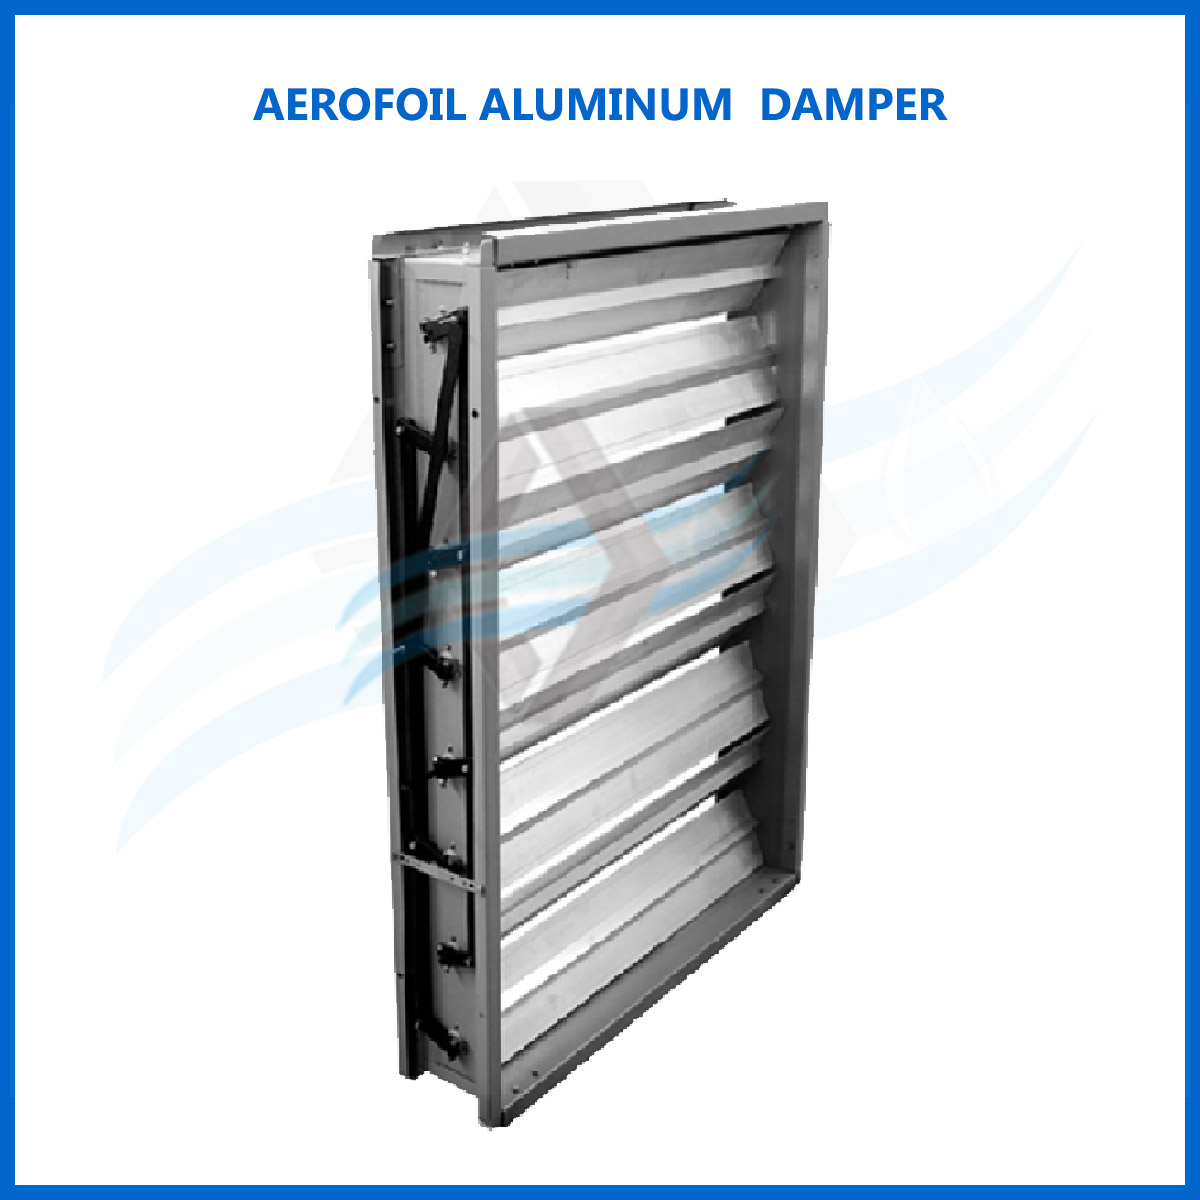 Aerofoil Damper Manufacturer and Supplier in Coimbatore,  Think Air Systems